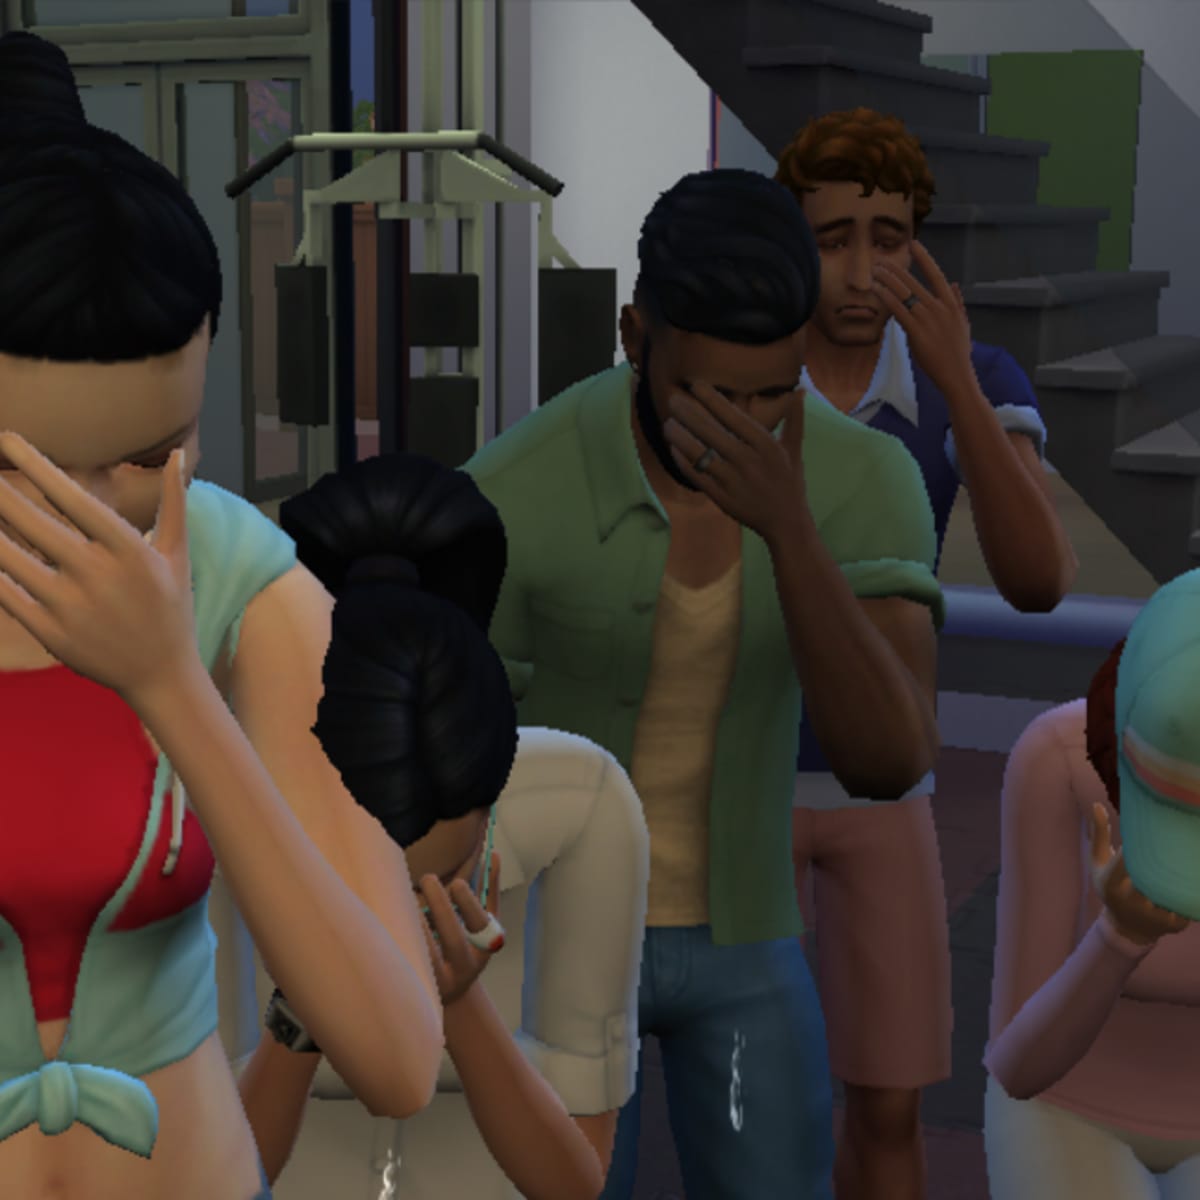 The Sims 4 Sad Wallpapers